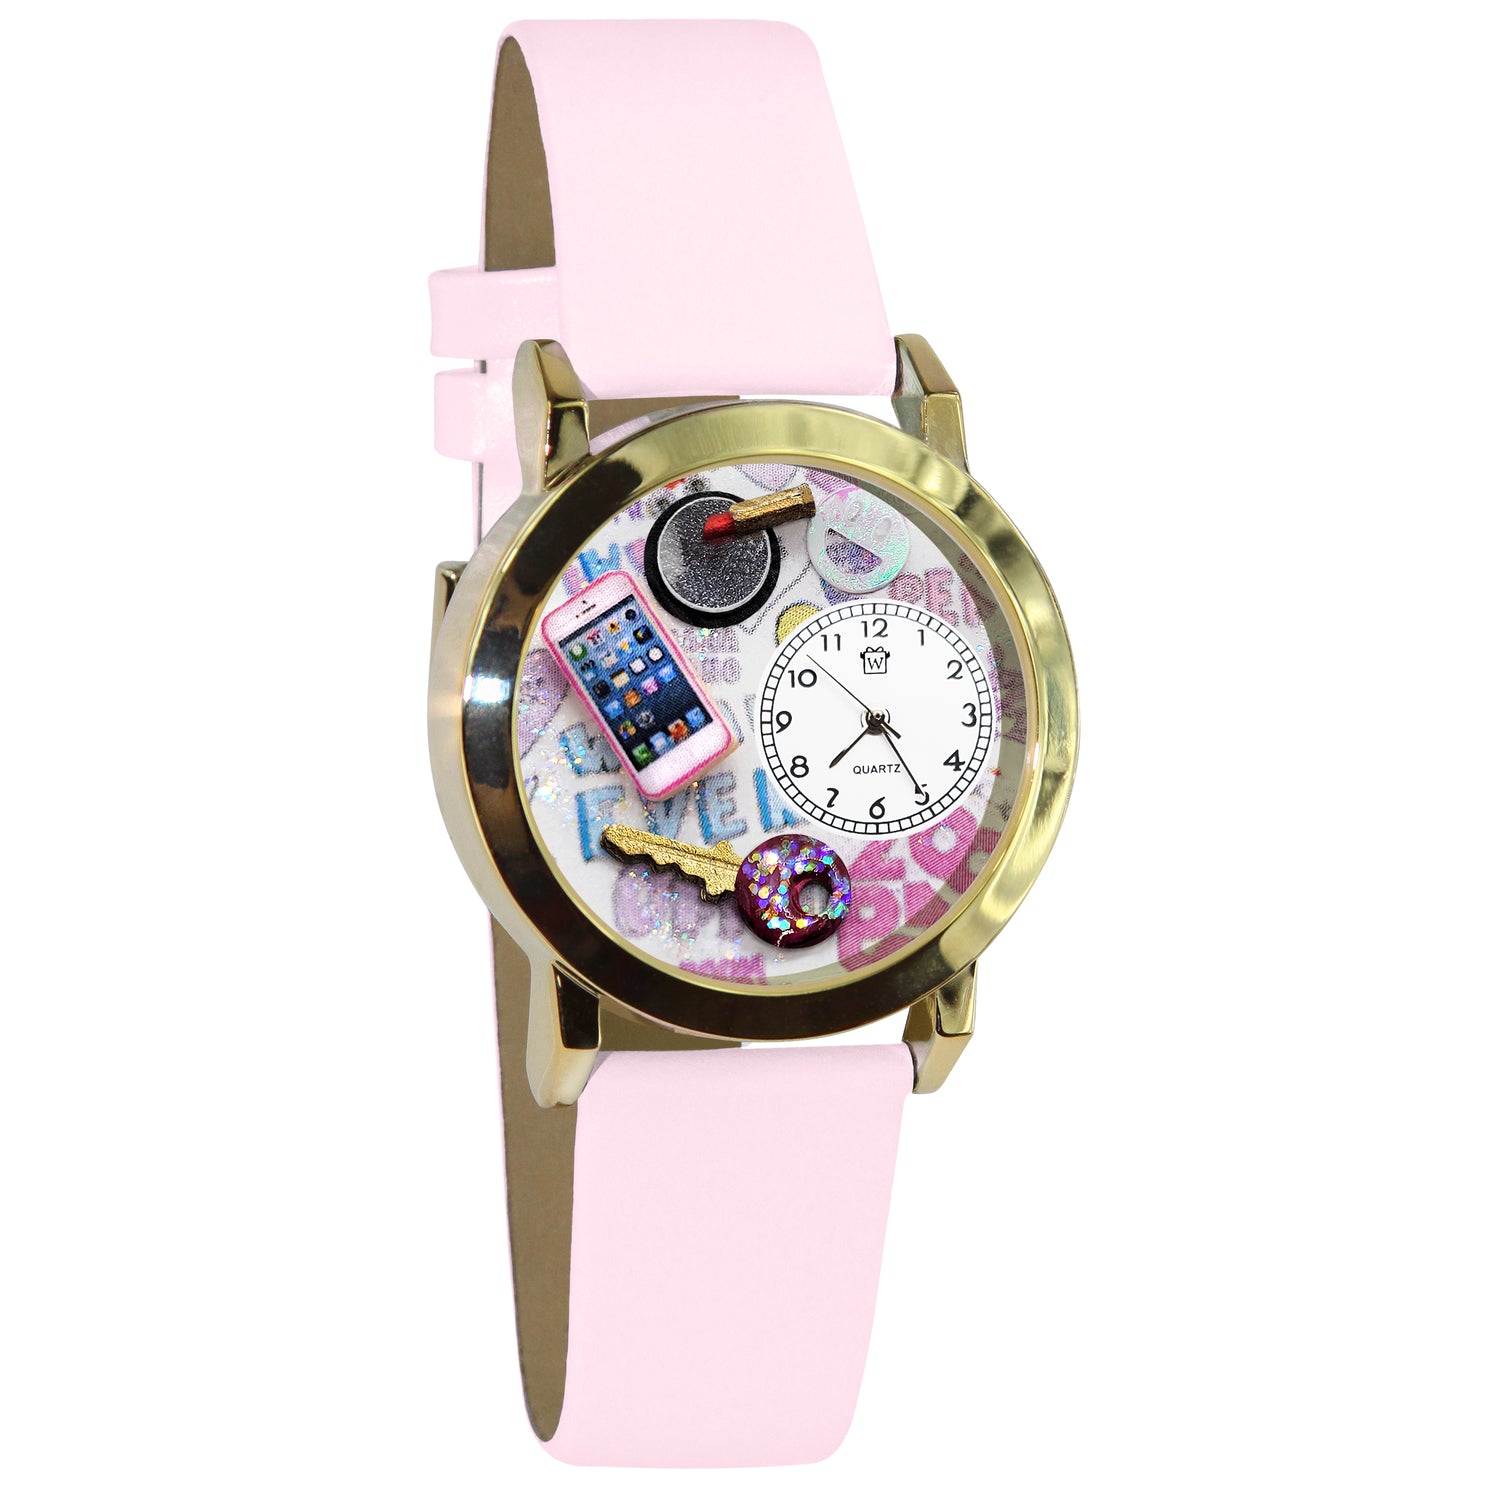 Whimsical Gifts | Teen Girl 3D Watch Small Style | Handmade in USA | Youth Themed | | Novelty Unique Fun Miniatures Gift | Gold Pink Leather Watch Band